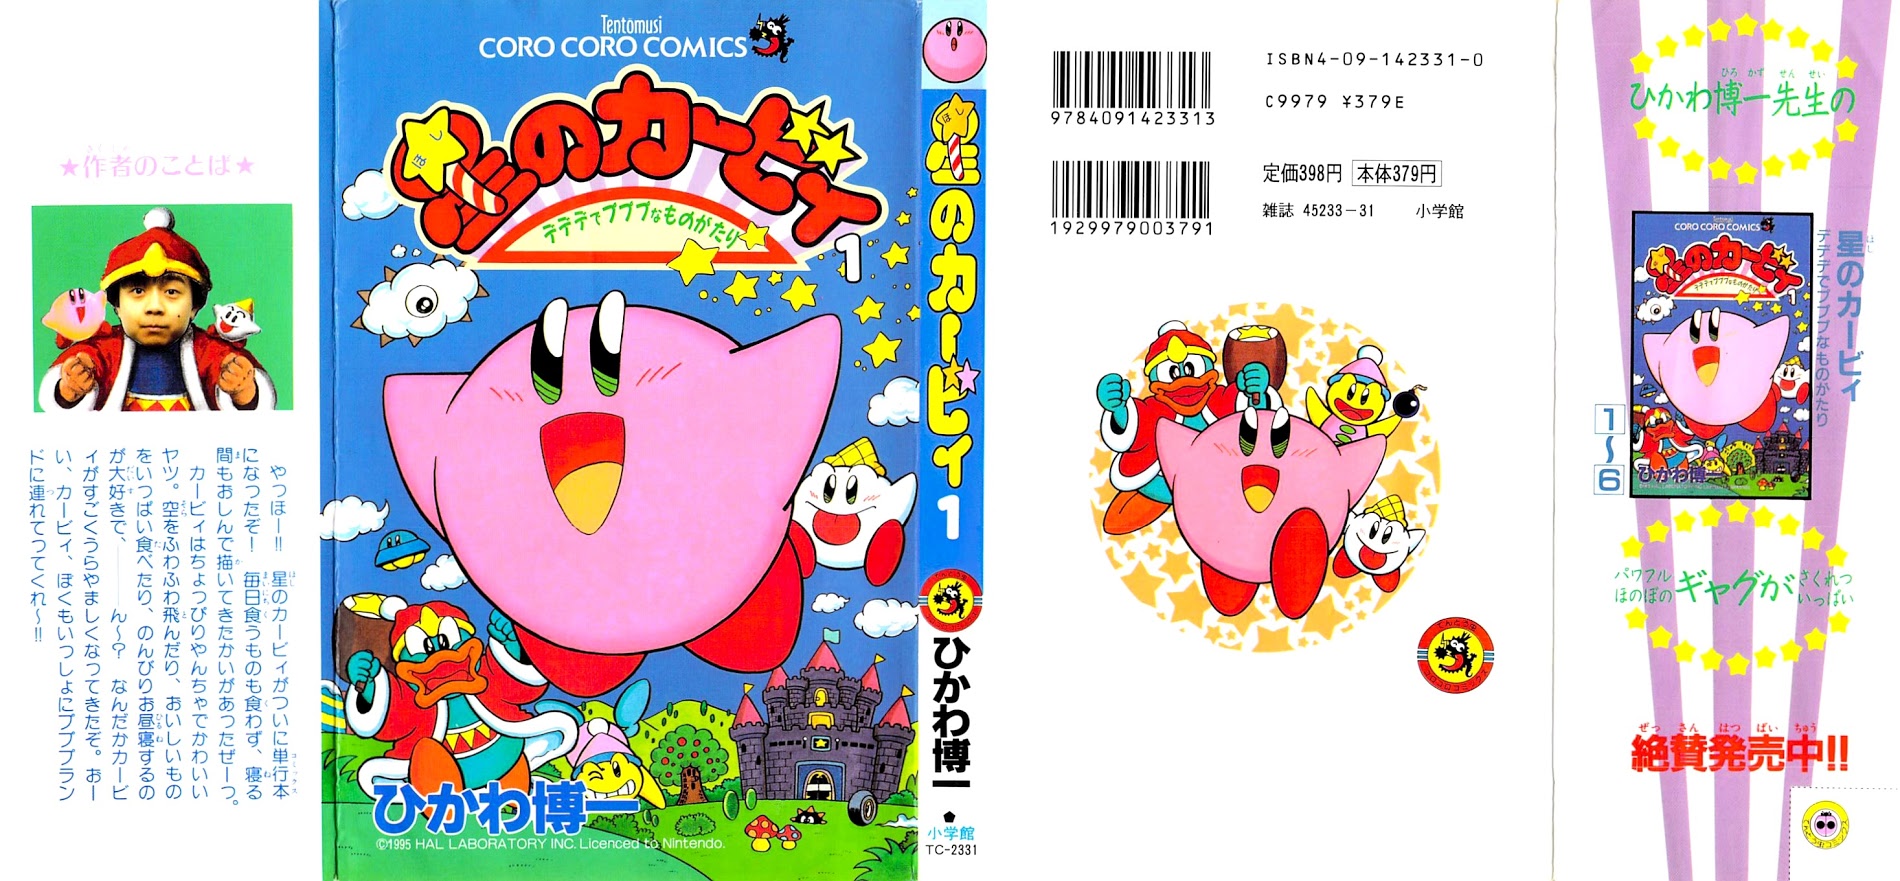 Kirby's Adventure Chapter 1 #1